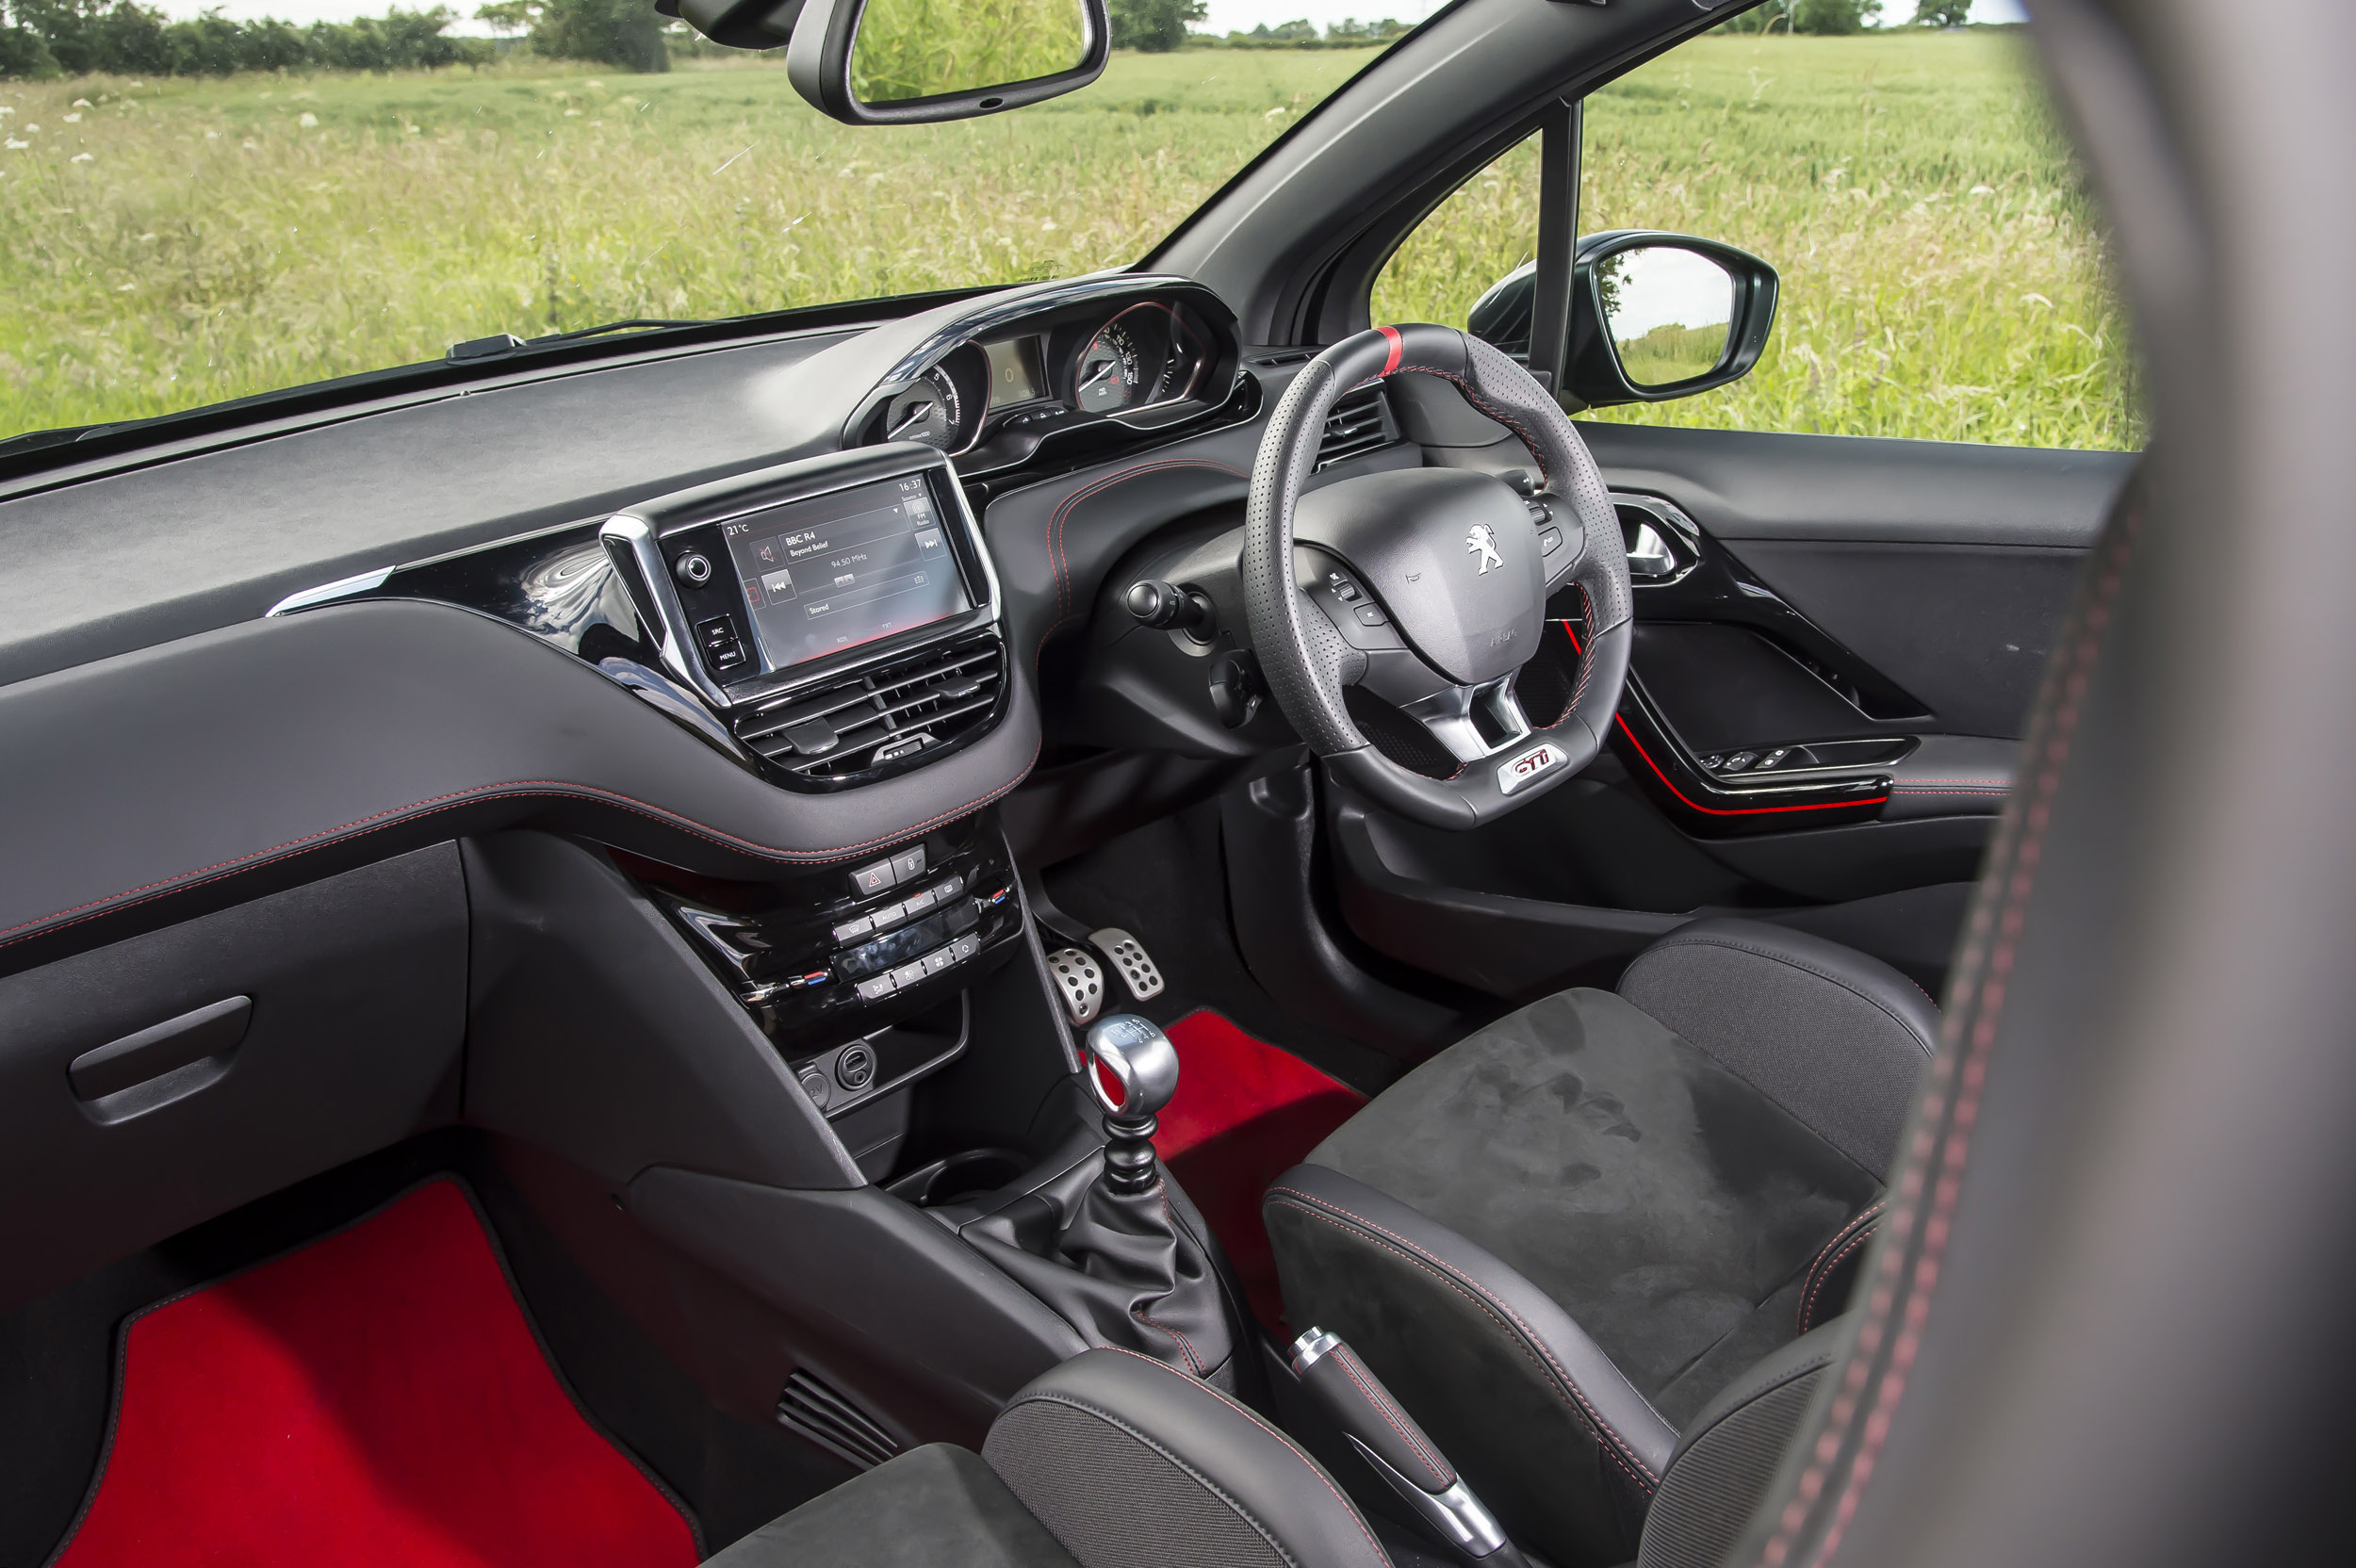 fusion Logical Compliment Peugeot 208 GTi and GTi by Peugeot Sport review - a return to 205 GTi form?  - Peugeot 208 GTi Interior and tech | evo